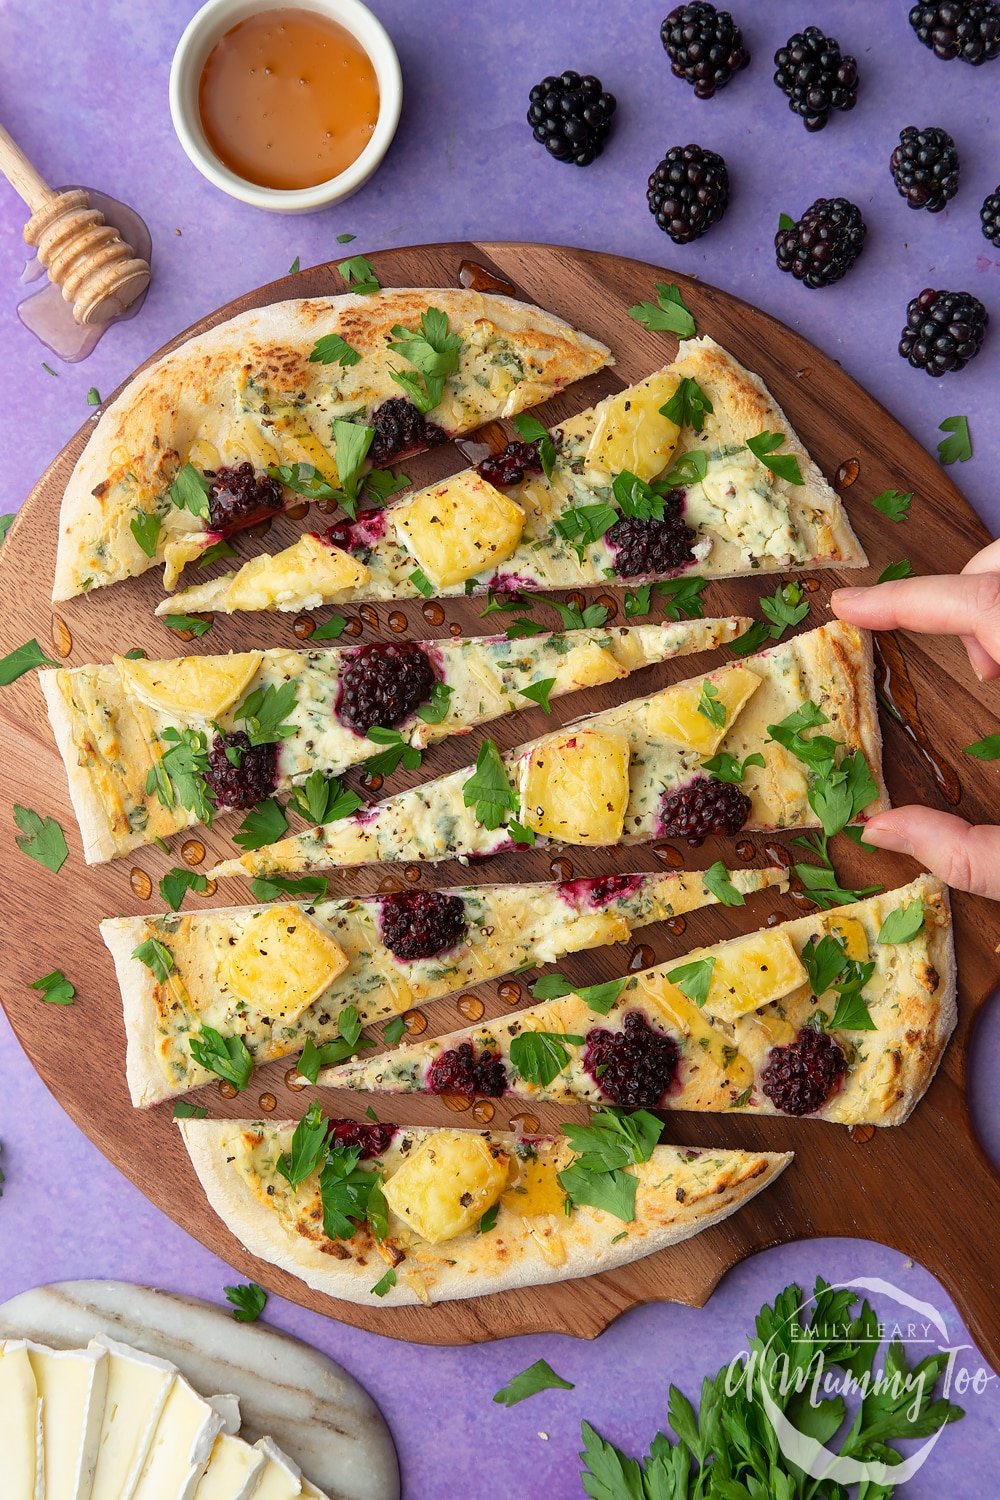 Brie and blackberry pizza sliced on a dark wooden board. A hand reaches in to take a slice.